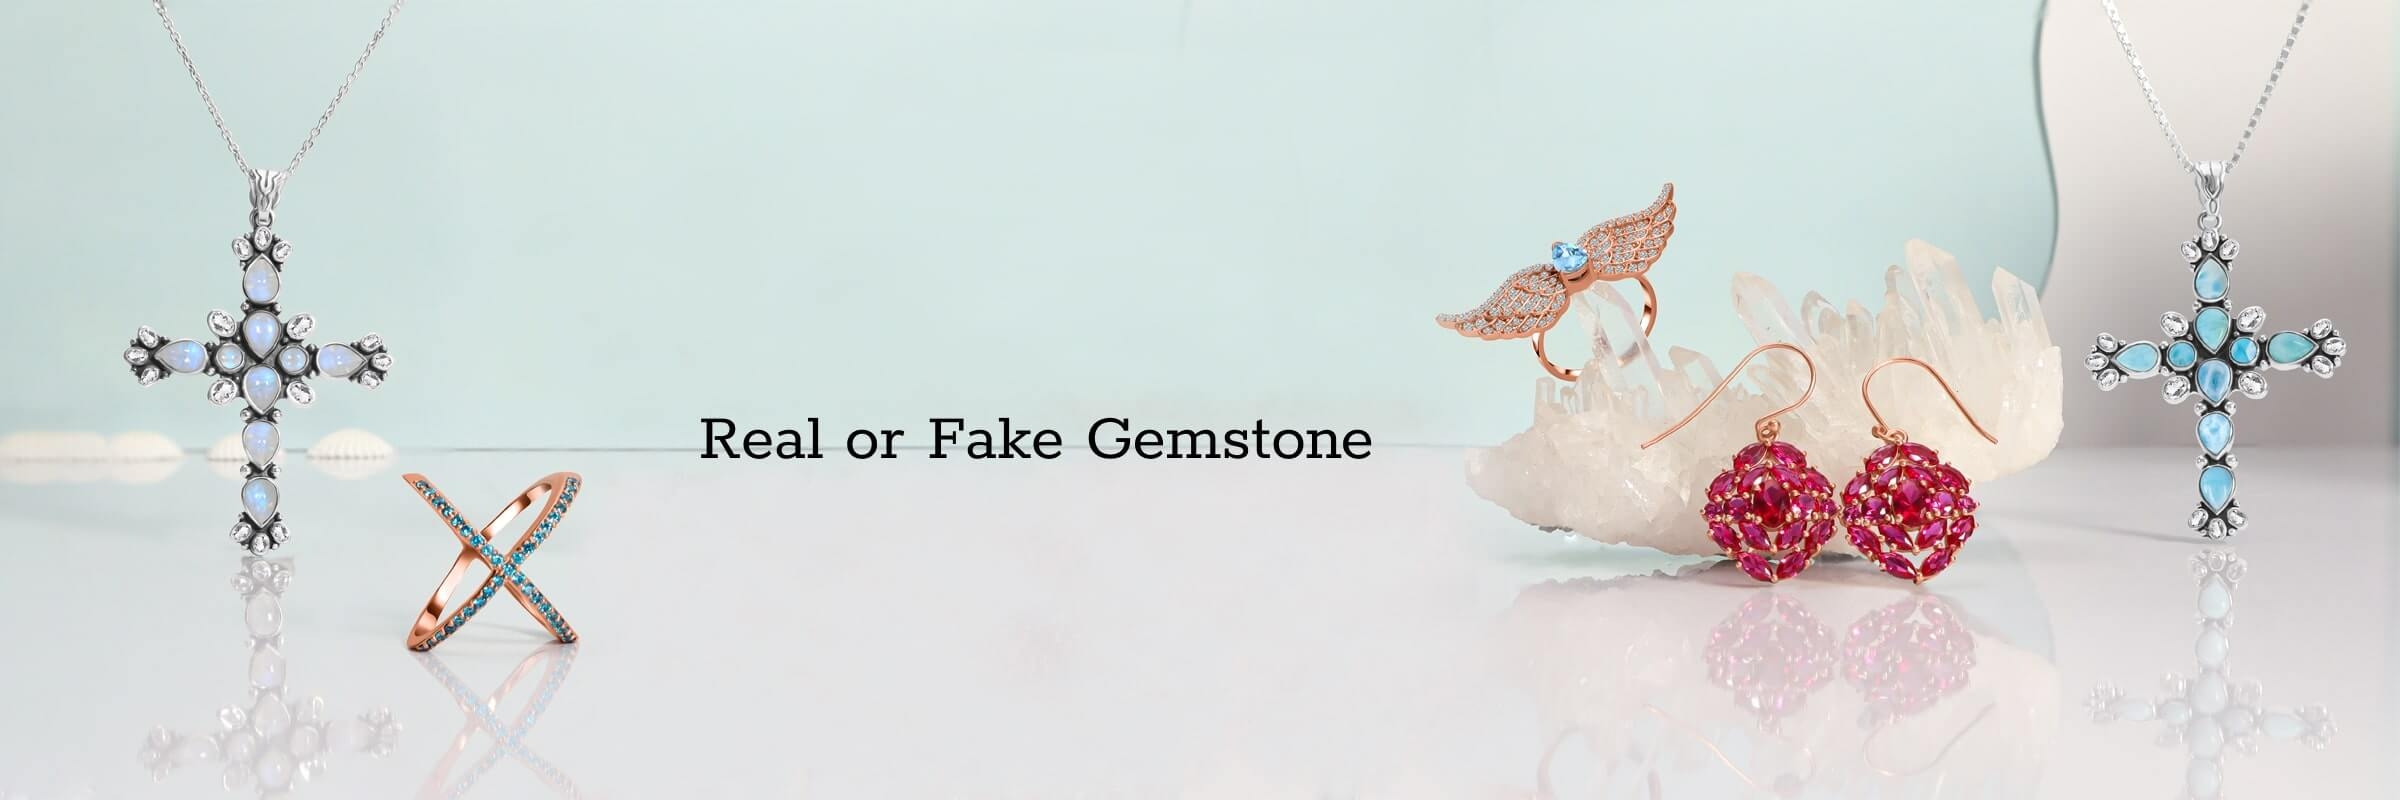 How To Identify If the Gemstone Is Real or Fake 1